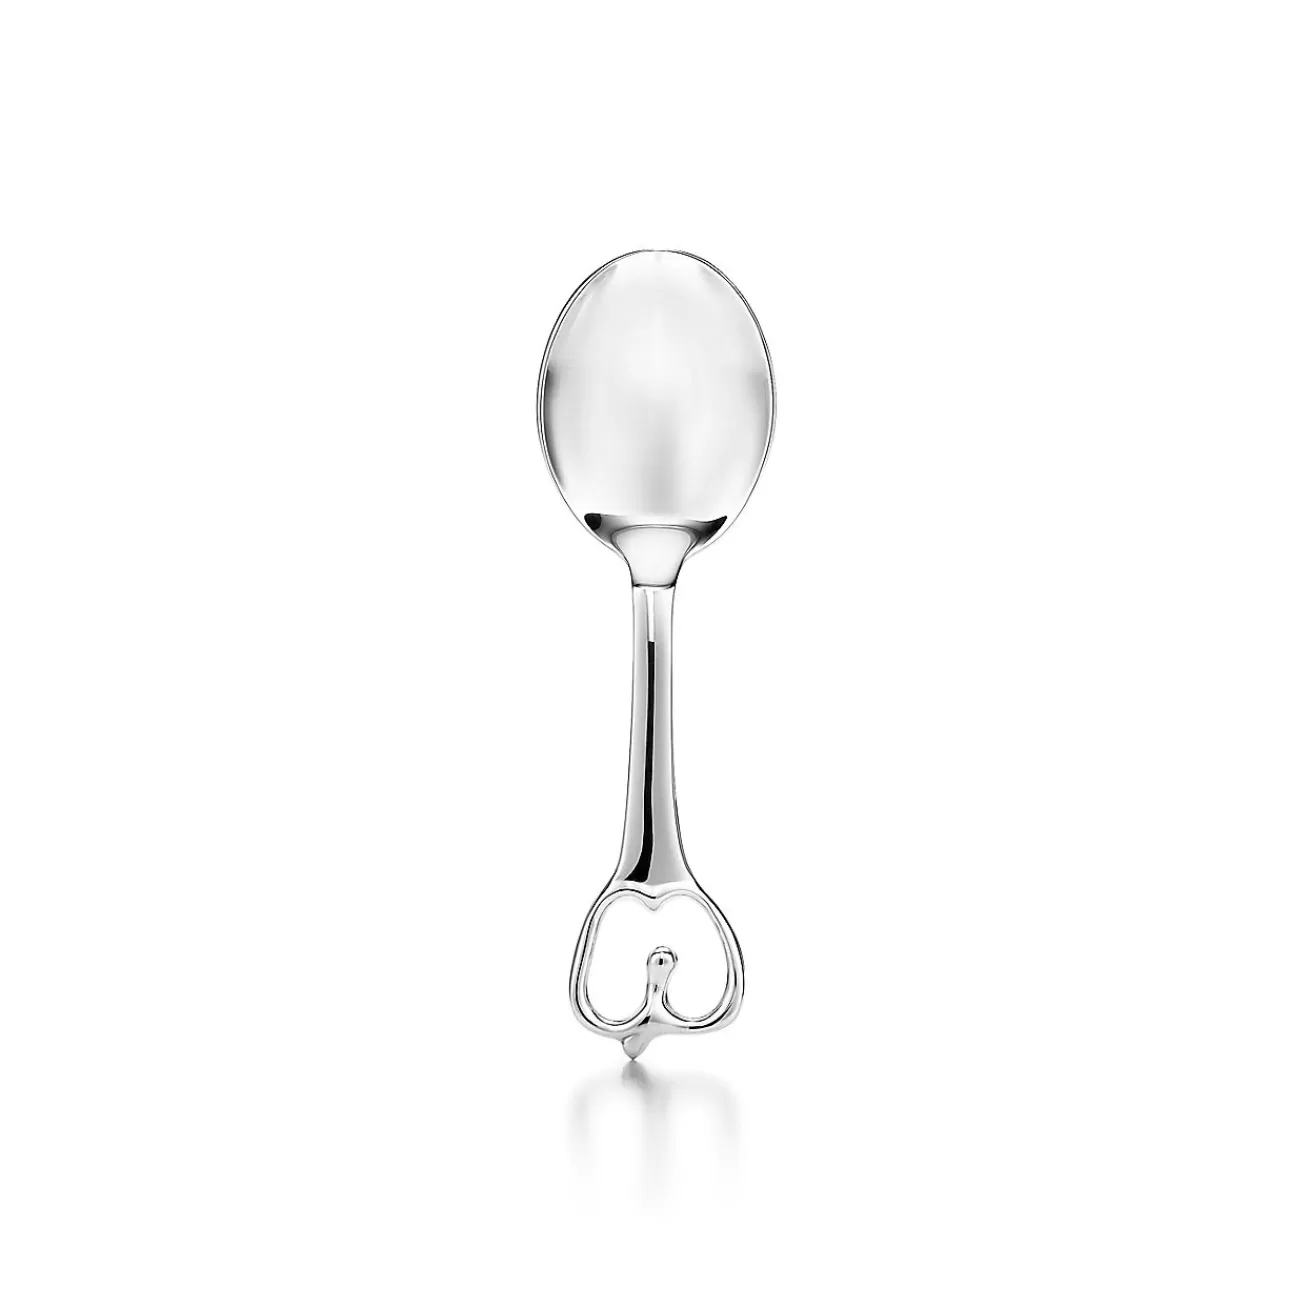 Tiffany & Co. Elsa Peretti® Apple child’s spoon in sterling silver. | ^ Baby | Baby